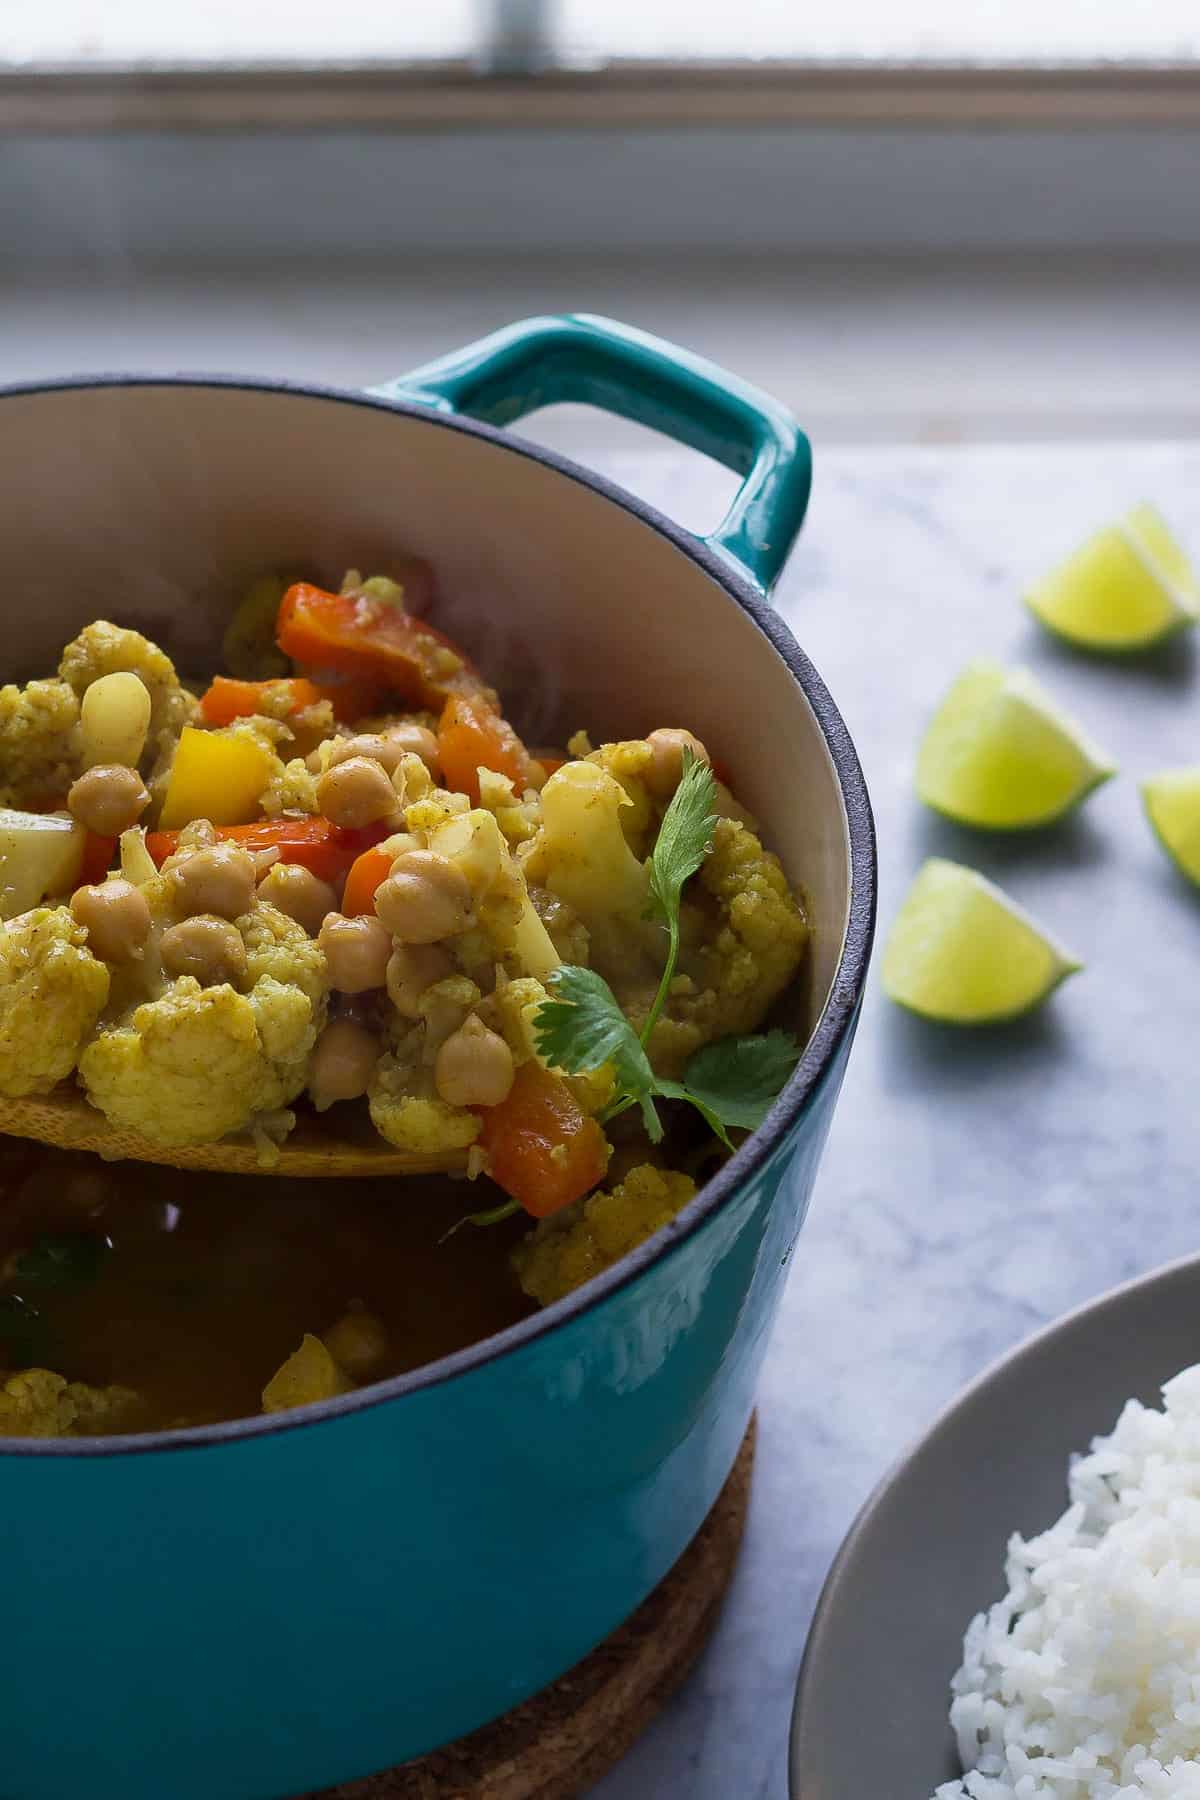 This chickpea & cauliflower vegan curry is bright and flavorful, and is easy enough for a week-night dinner!